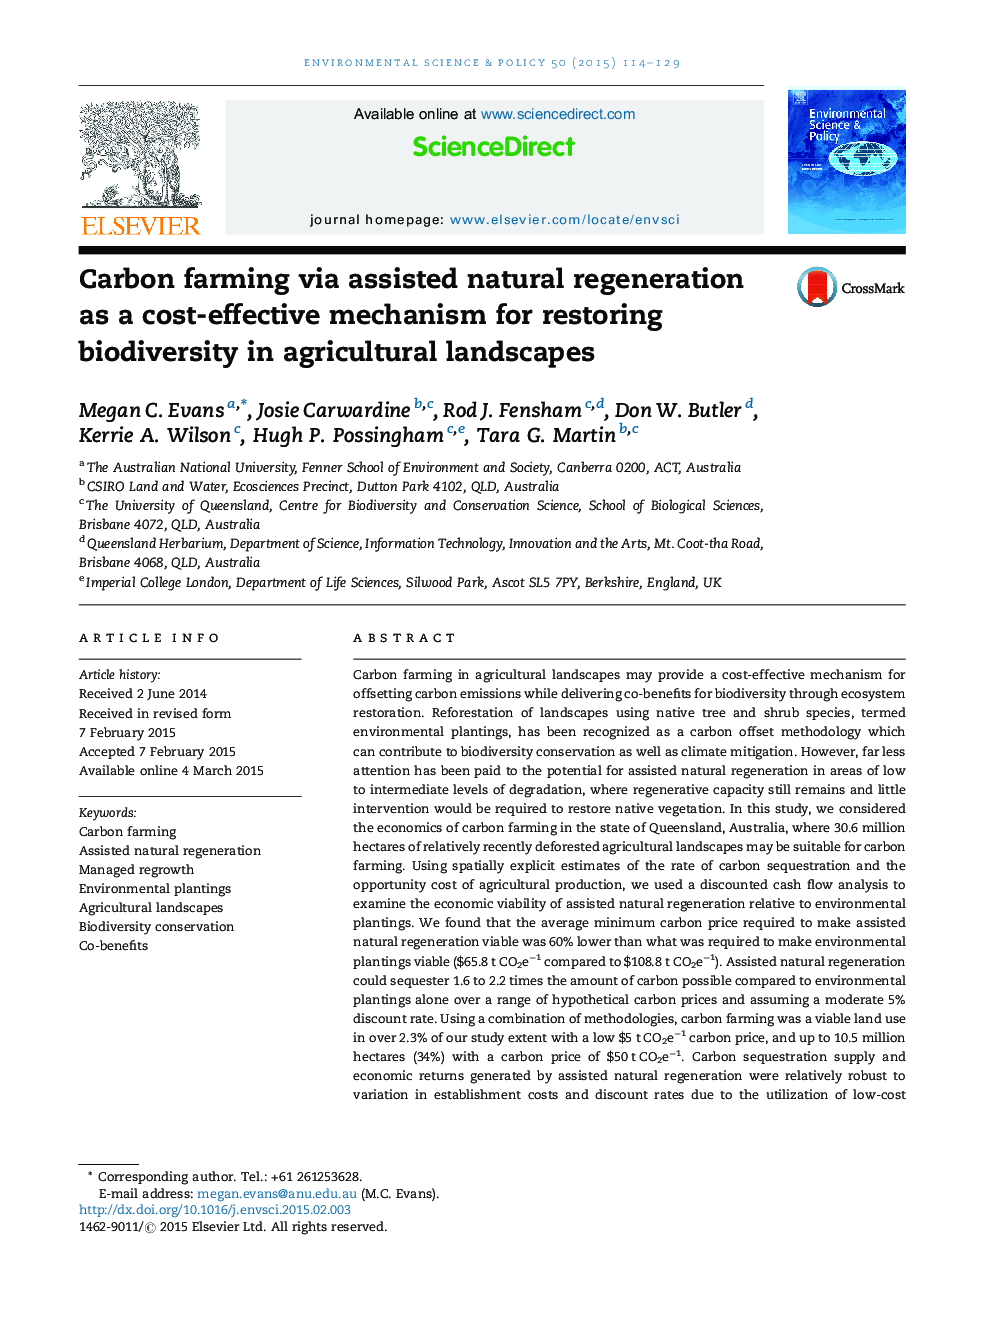 Carbon farming via assisted natural regeneration as a cost-effective mechanism for restoring biodiversity in agricultural landscapes